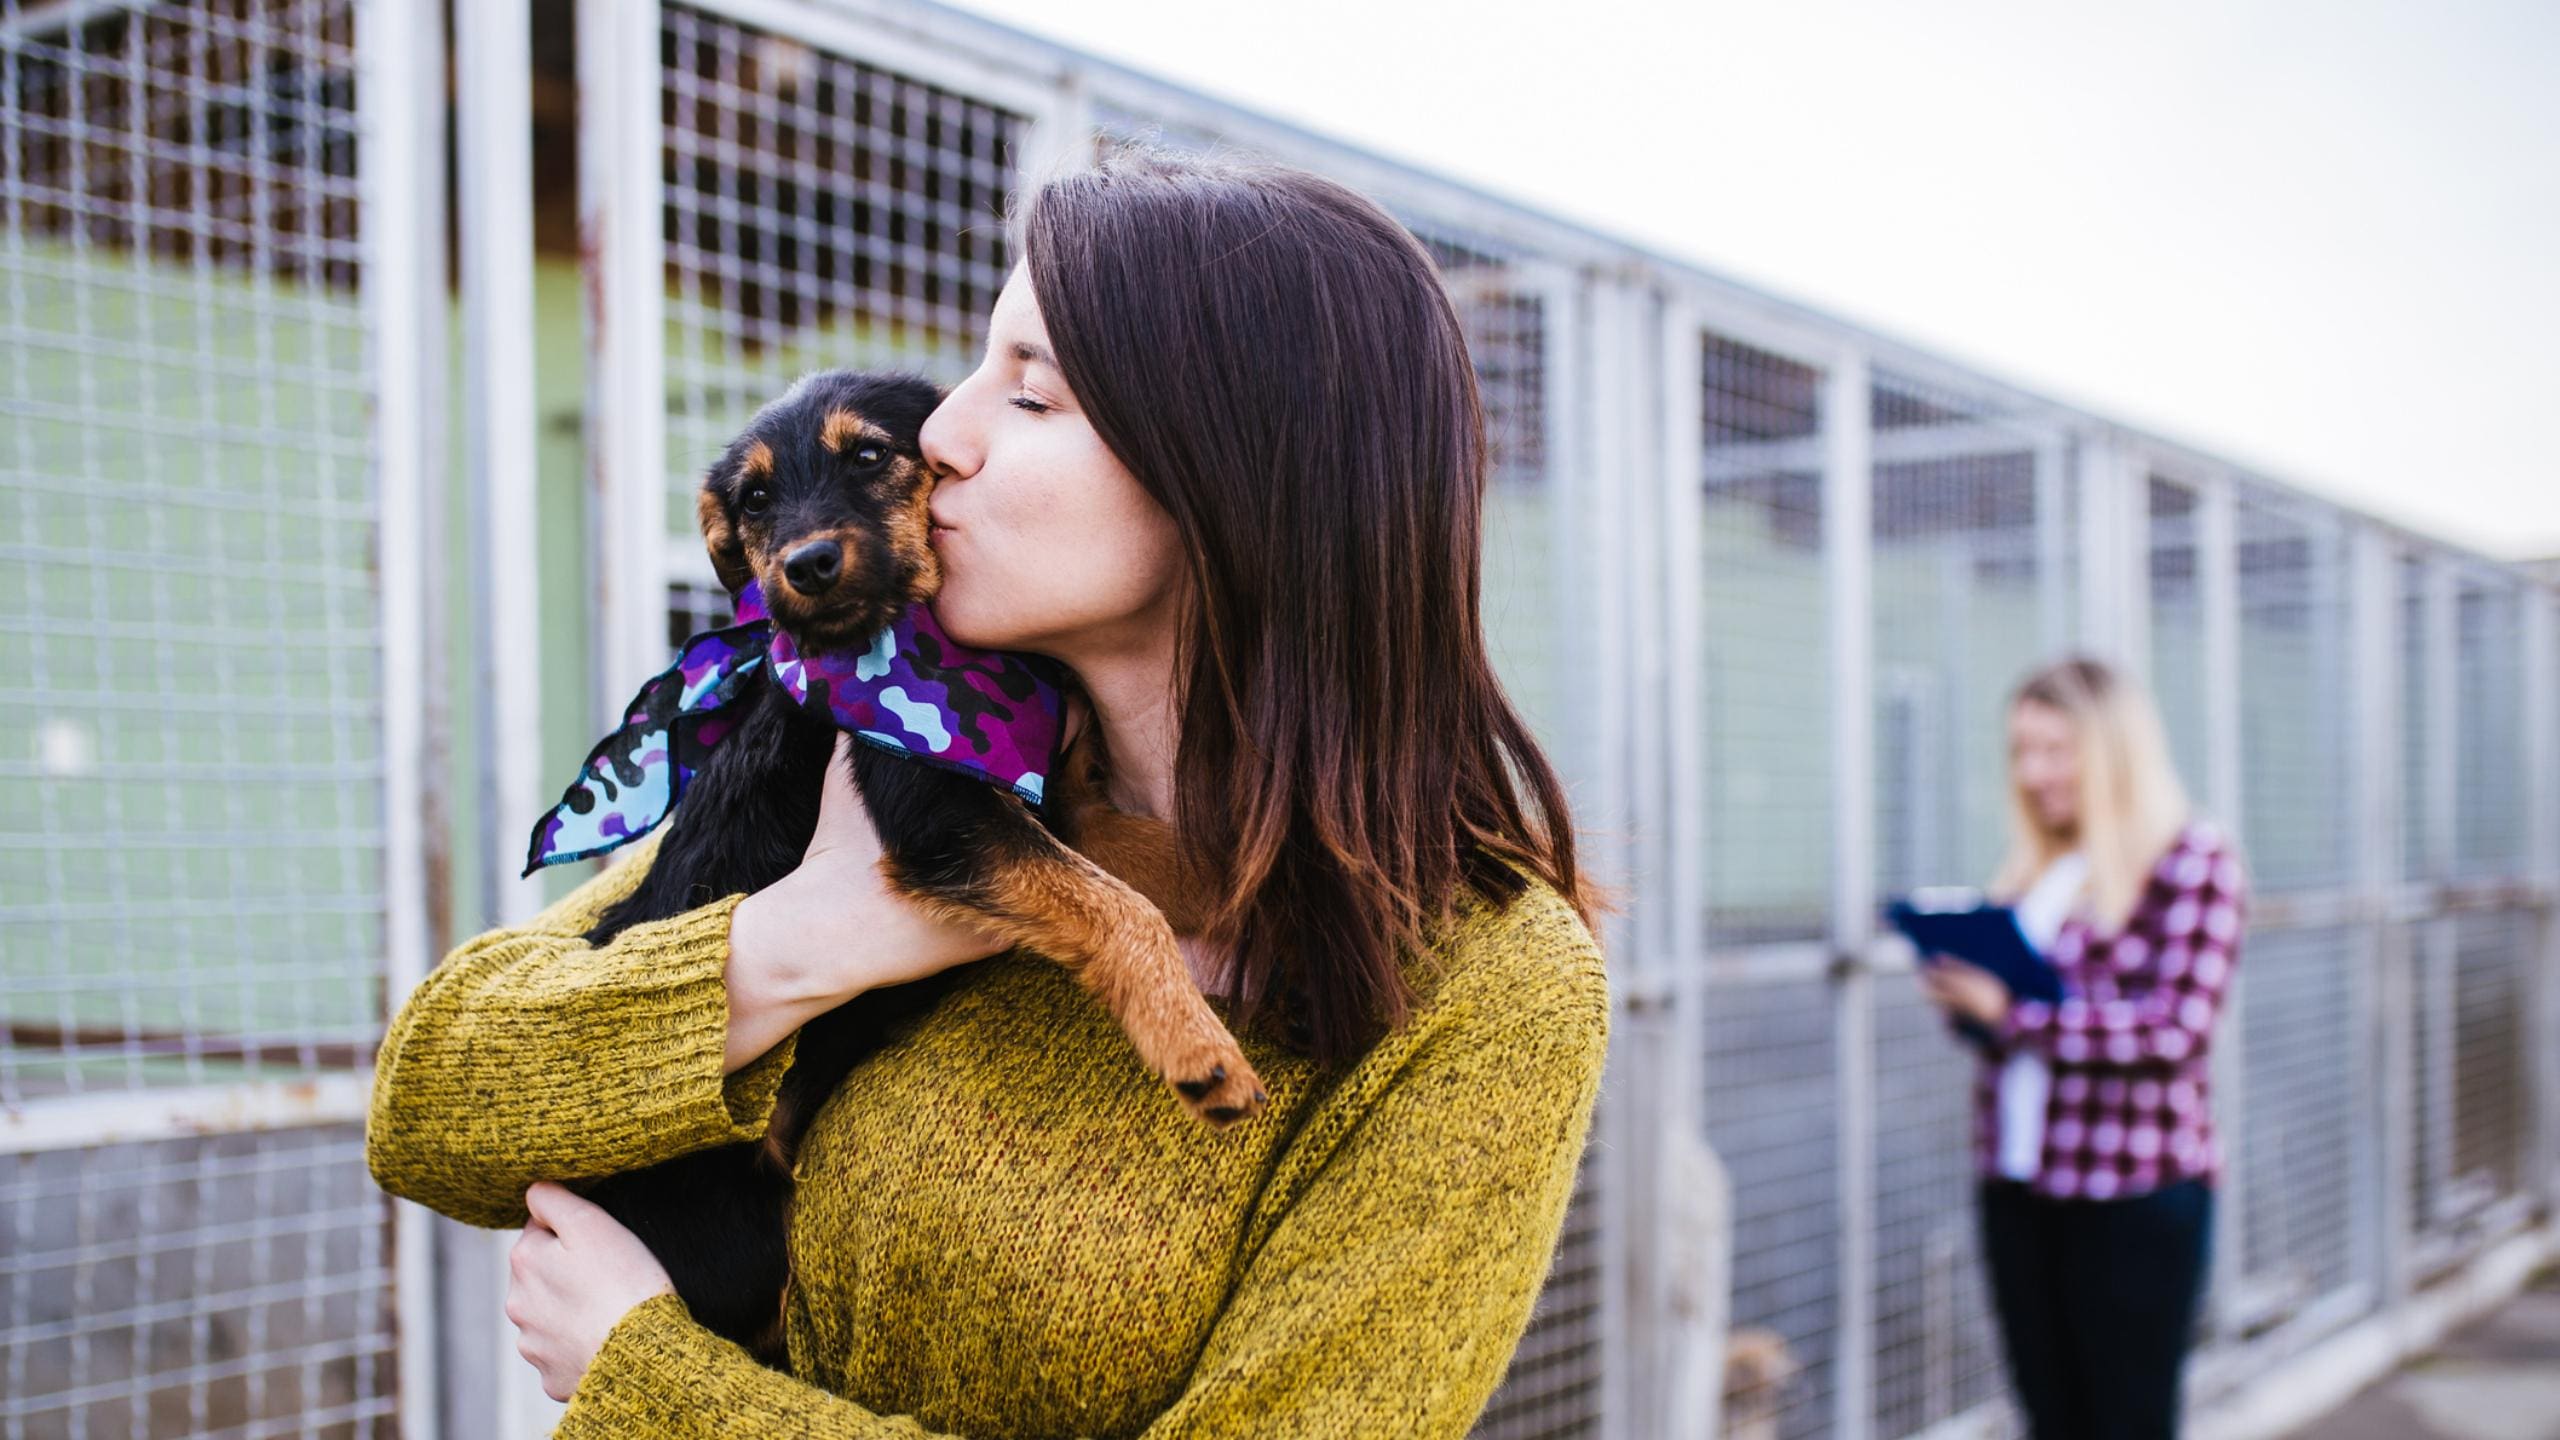 LA Animal Services, Michelson Found Animals Foundation & the Chargers Impact Fund Combine Efforts to Provide Critical Spay and Neuter Surgeries for Shelter Pets